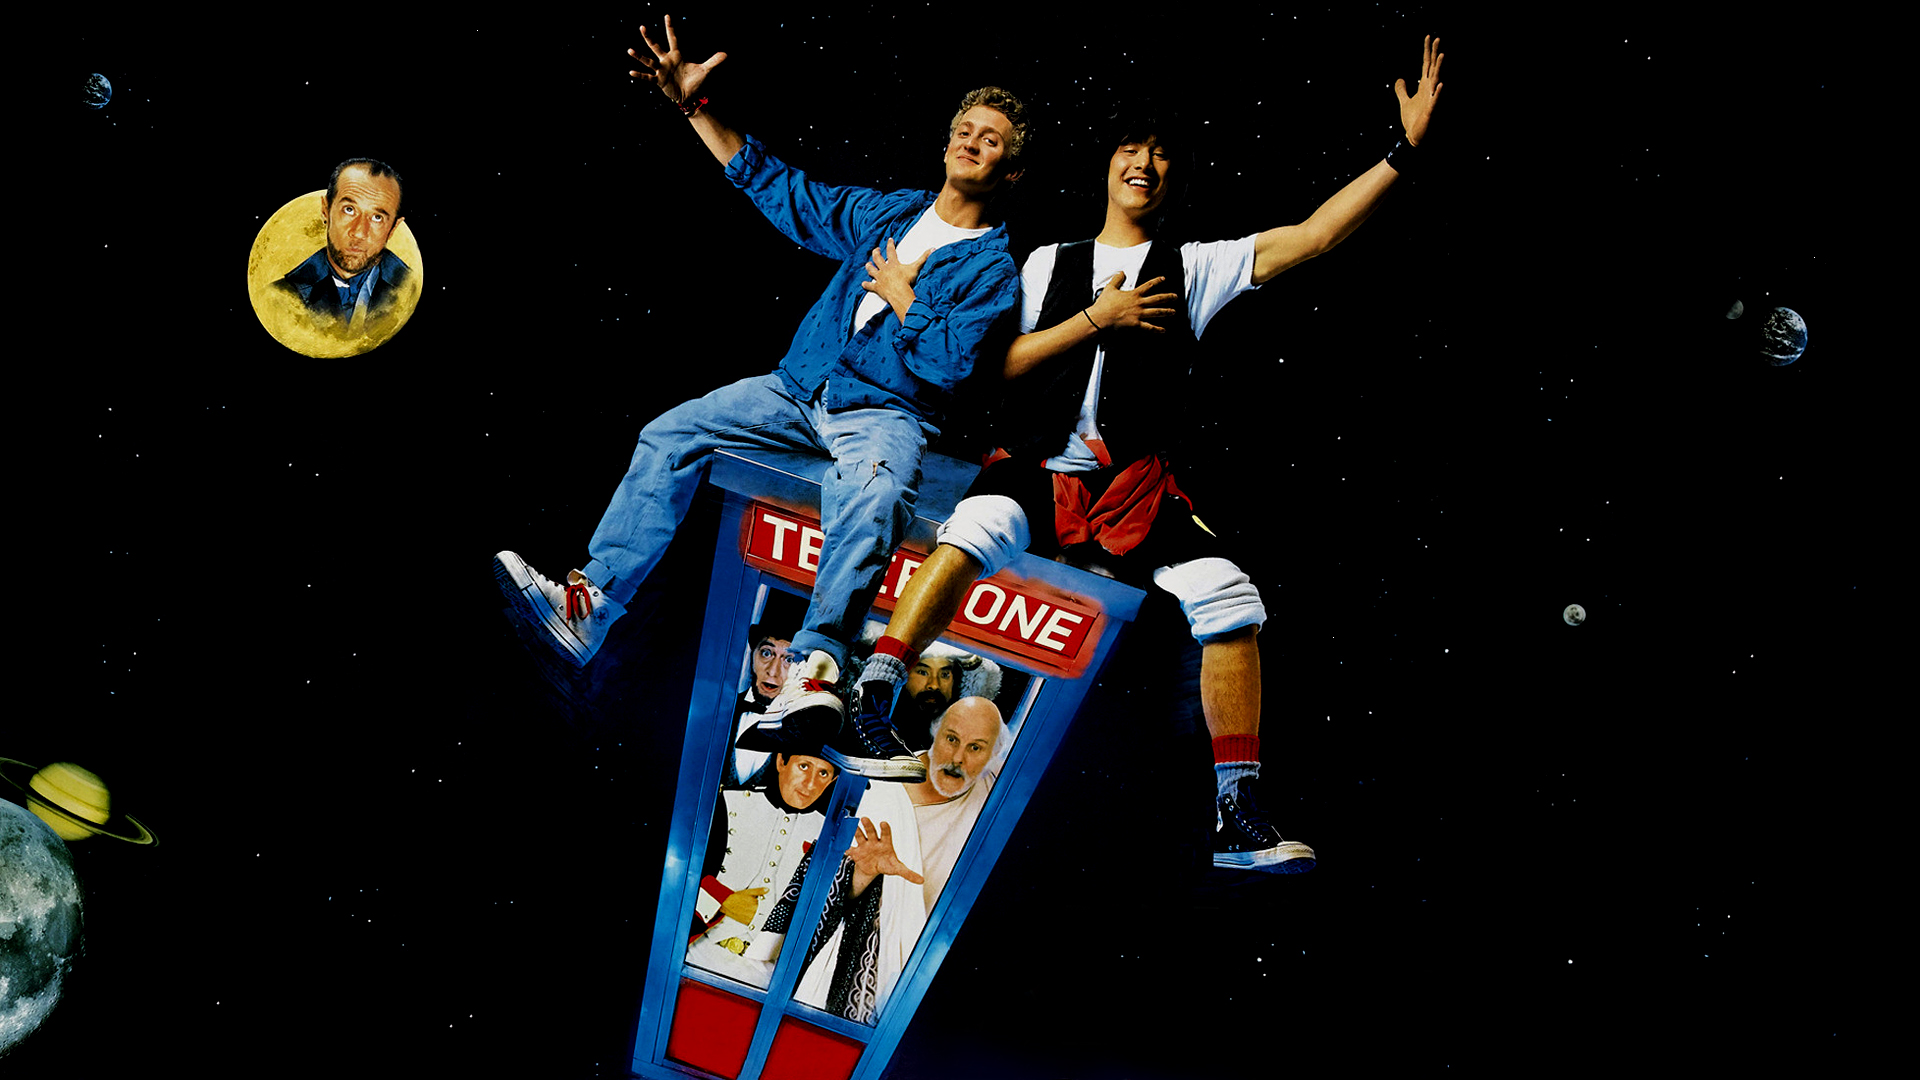 Movie Bill & Ted's Excellent Adventure HD Wallpaper | Background Image